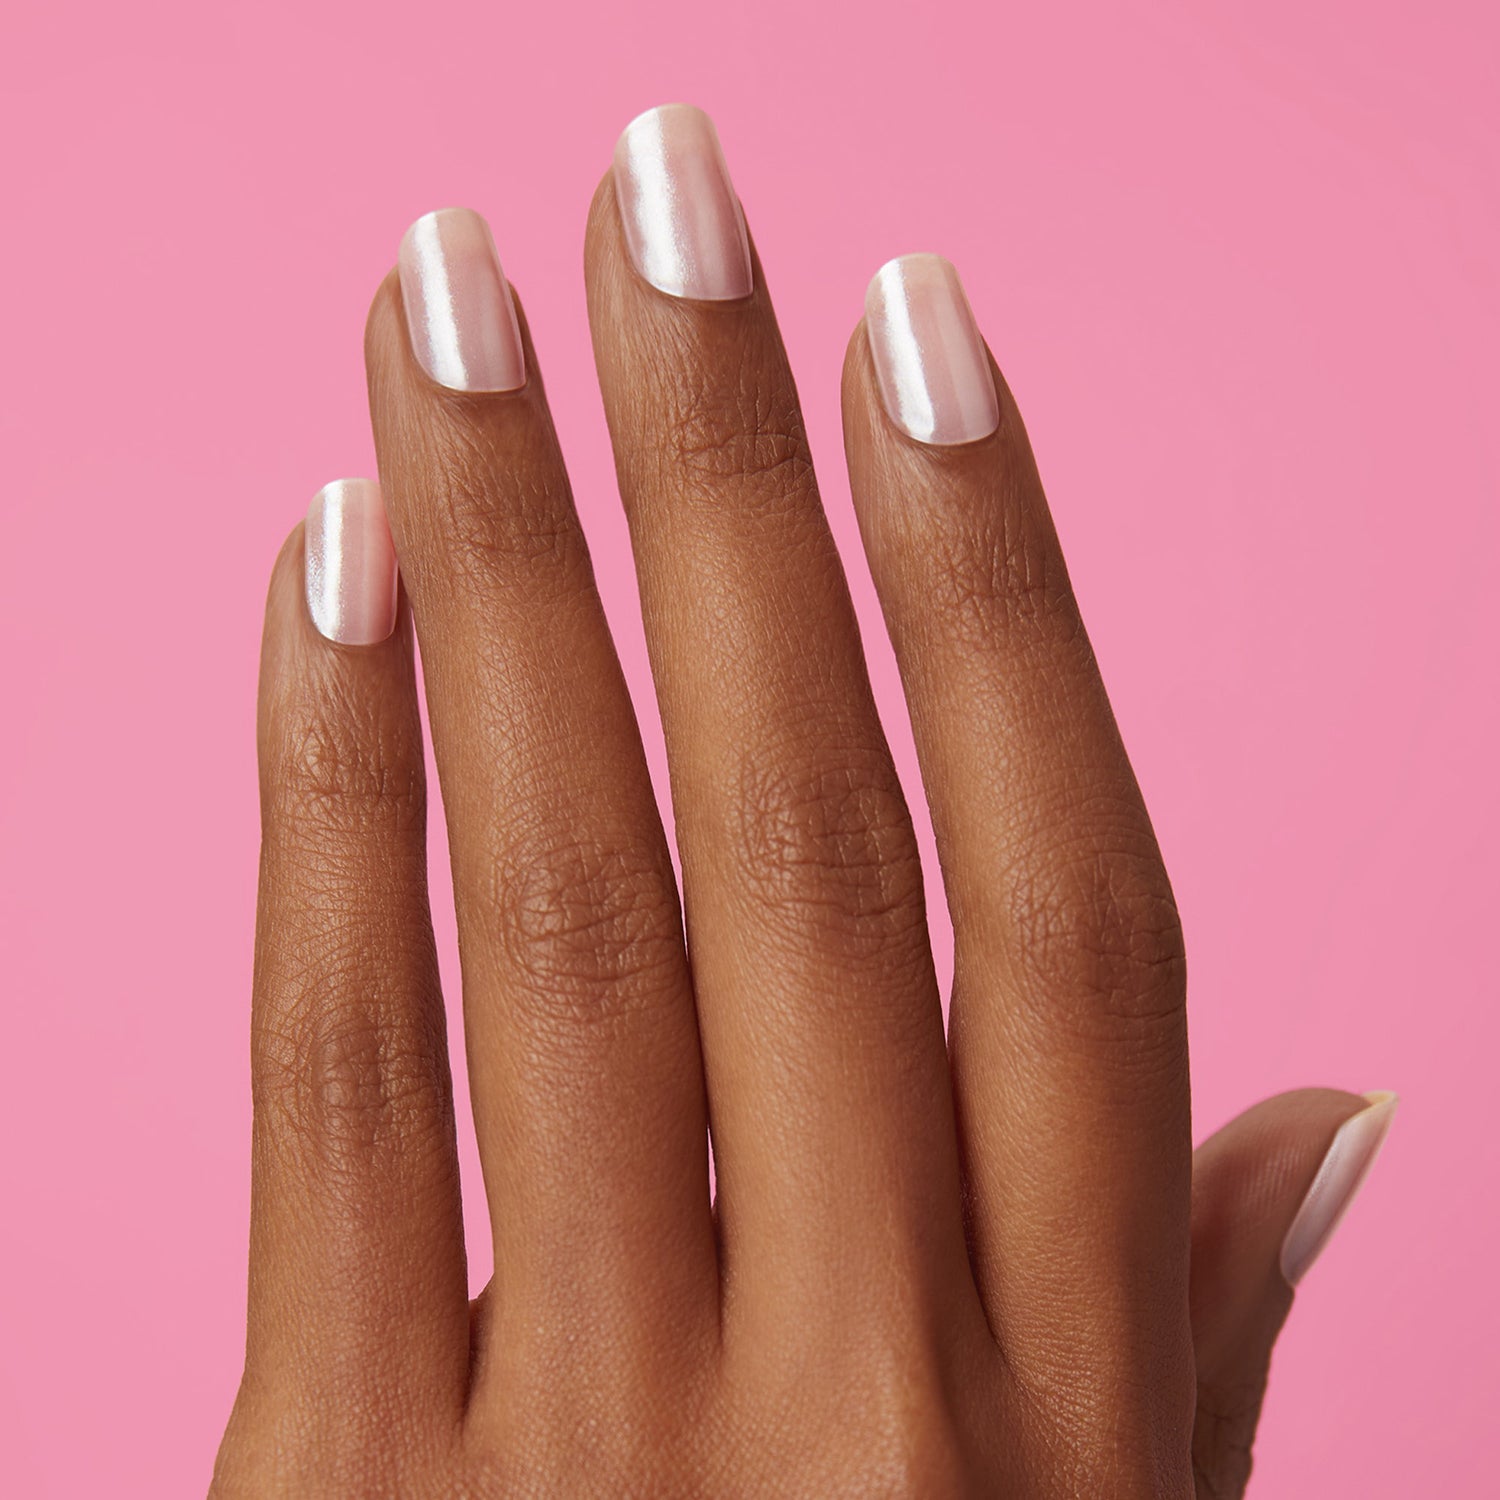 35 Nail Trends 2023 To Have on Your List : Glazed Donut Pearl Nails